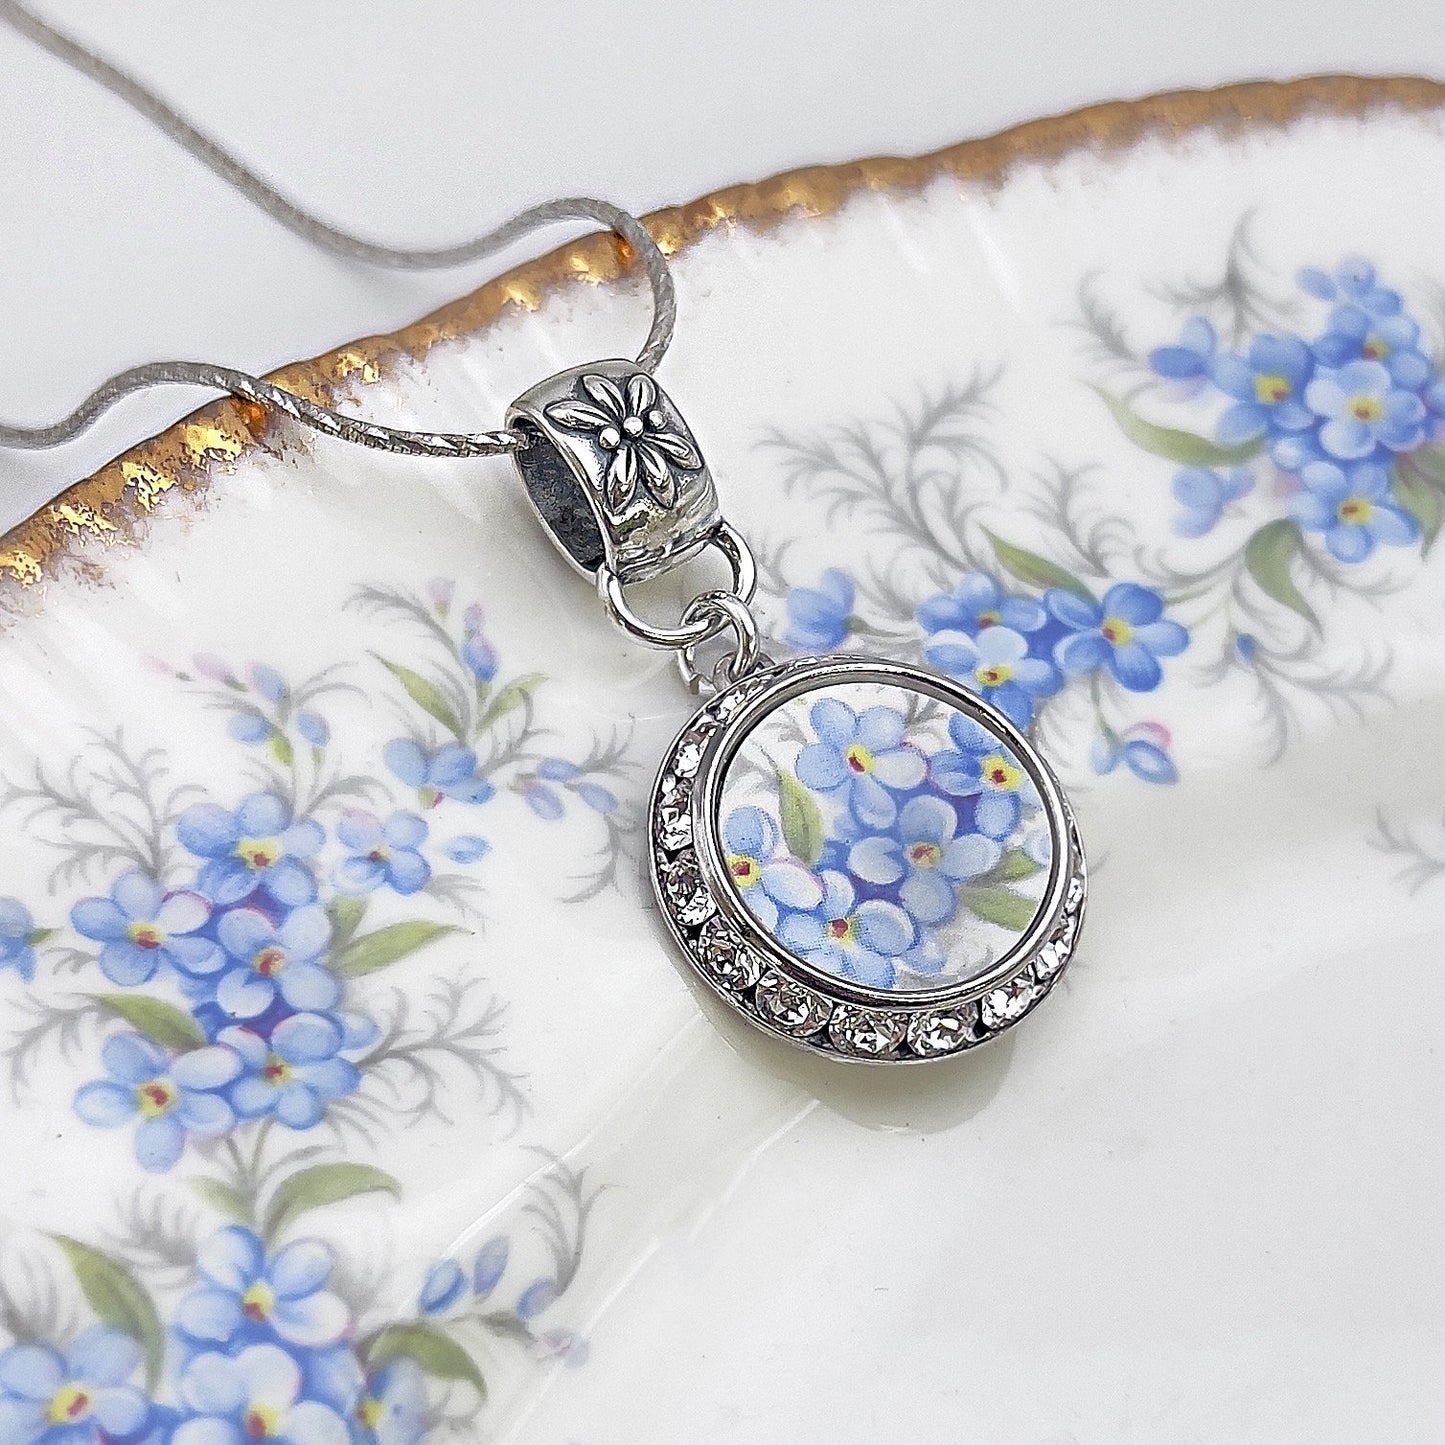 Adjustable Forget Me Not Flower Necklace, 20th Wedding Anniversary Gift for Wife, Crystal Broken China Jewelry